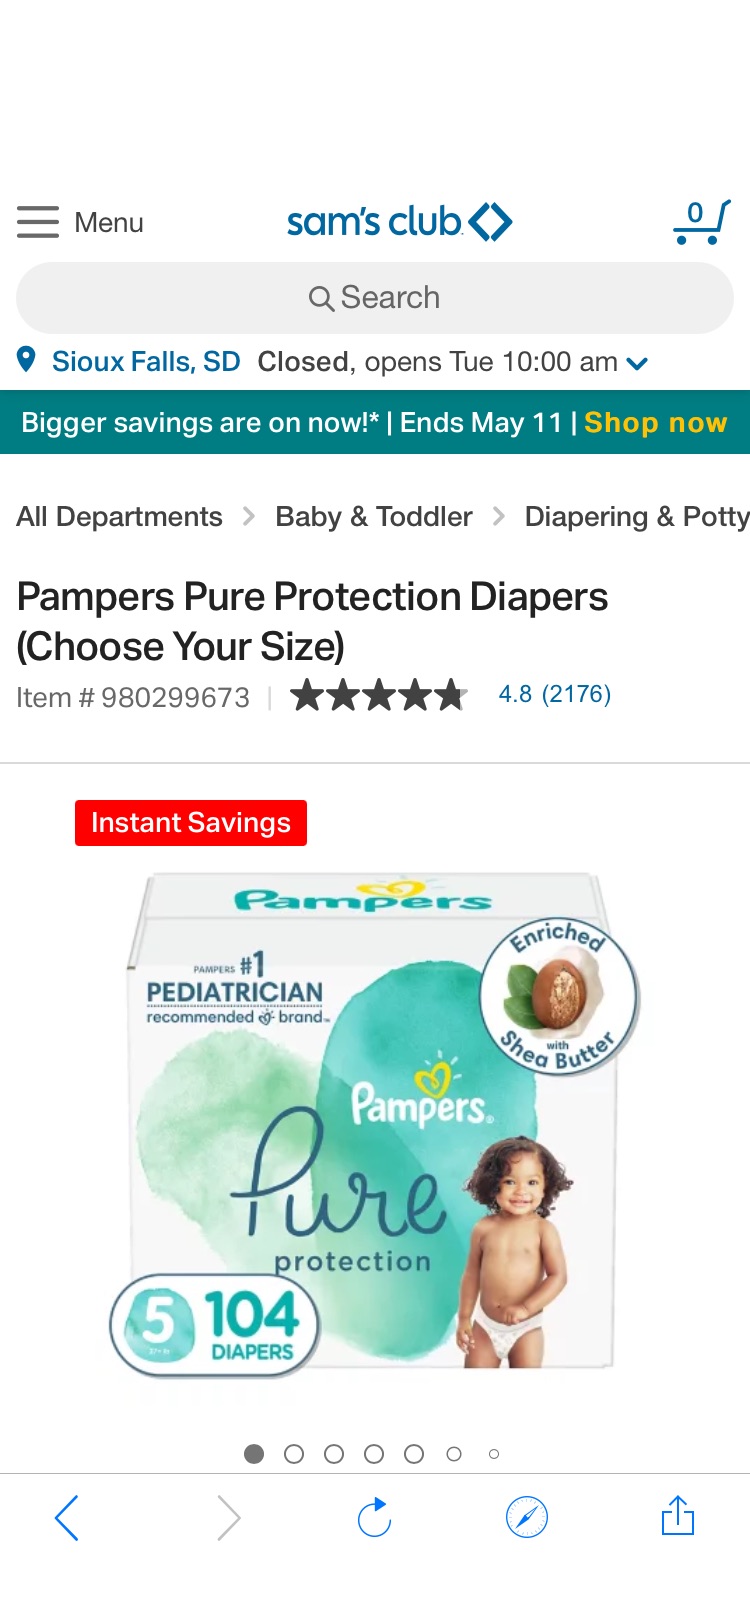 Pampers Pure Protection Diapers (Size 5) - Sam's Club 帮宝适纸尿裤纯净帮